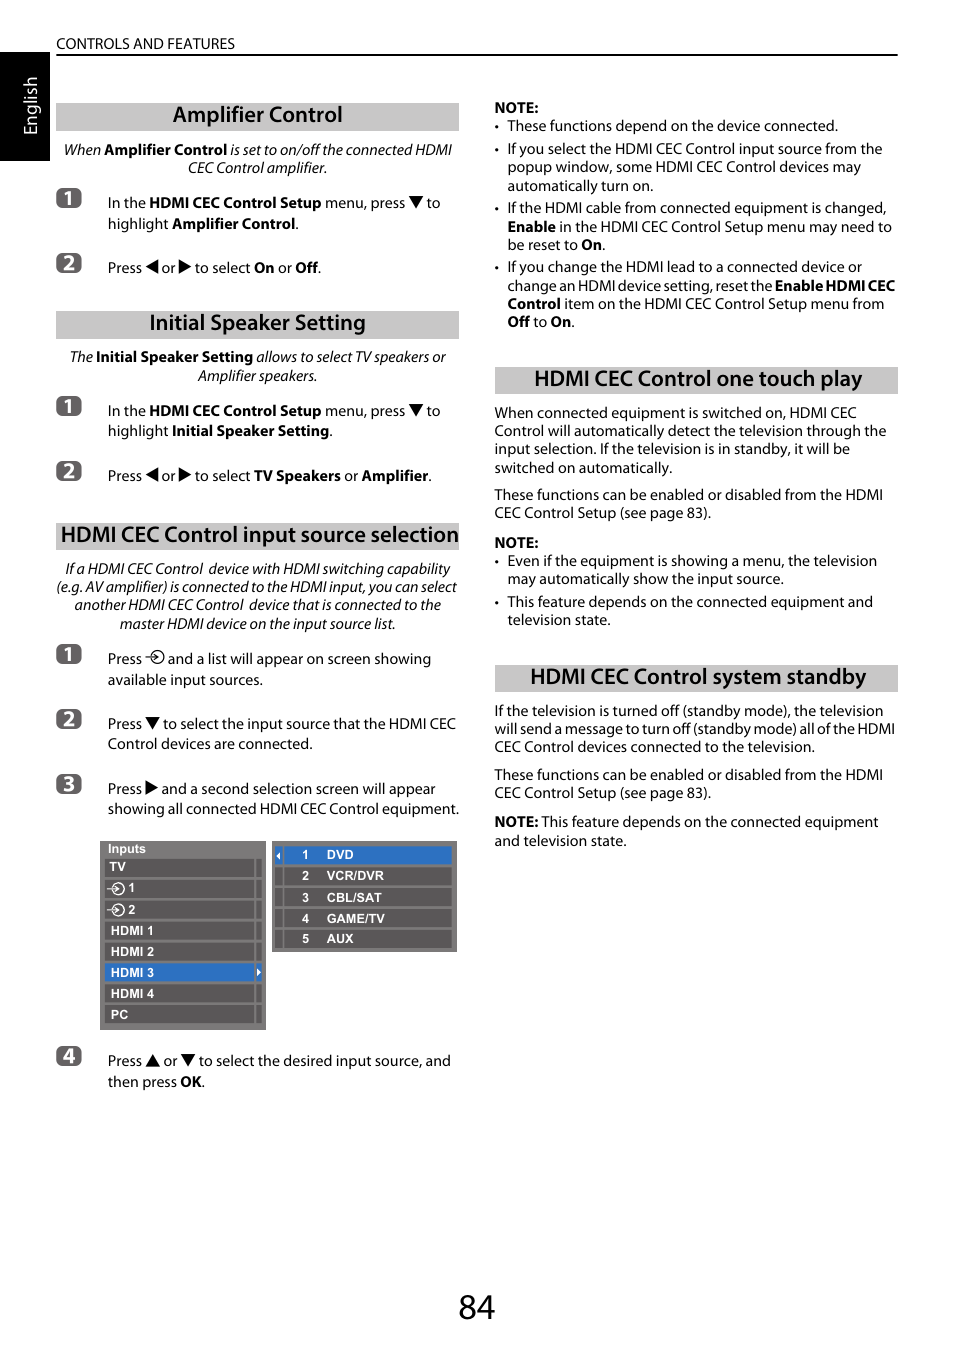 Amplifier control, Initial speaker setting, Hdmi cec control input source selection | Hdmi cec control one touch play, Hdmi cec control system standby | Toshiba YL985 User Manual | Page 84 / 102